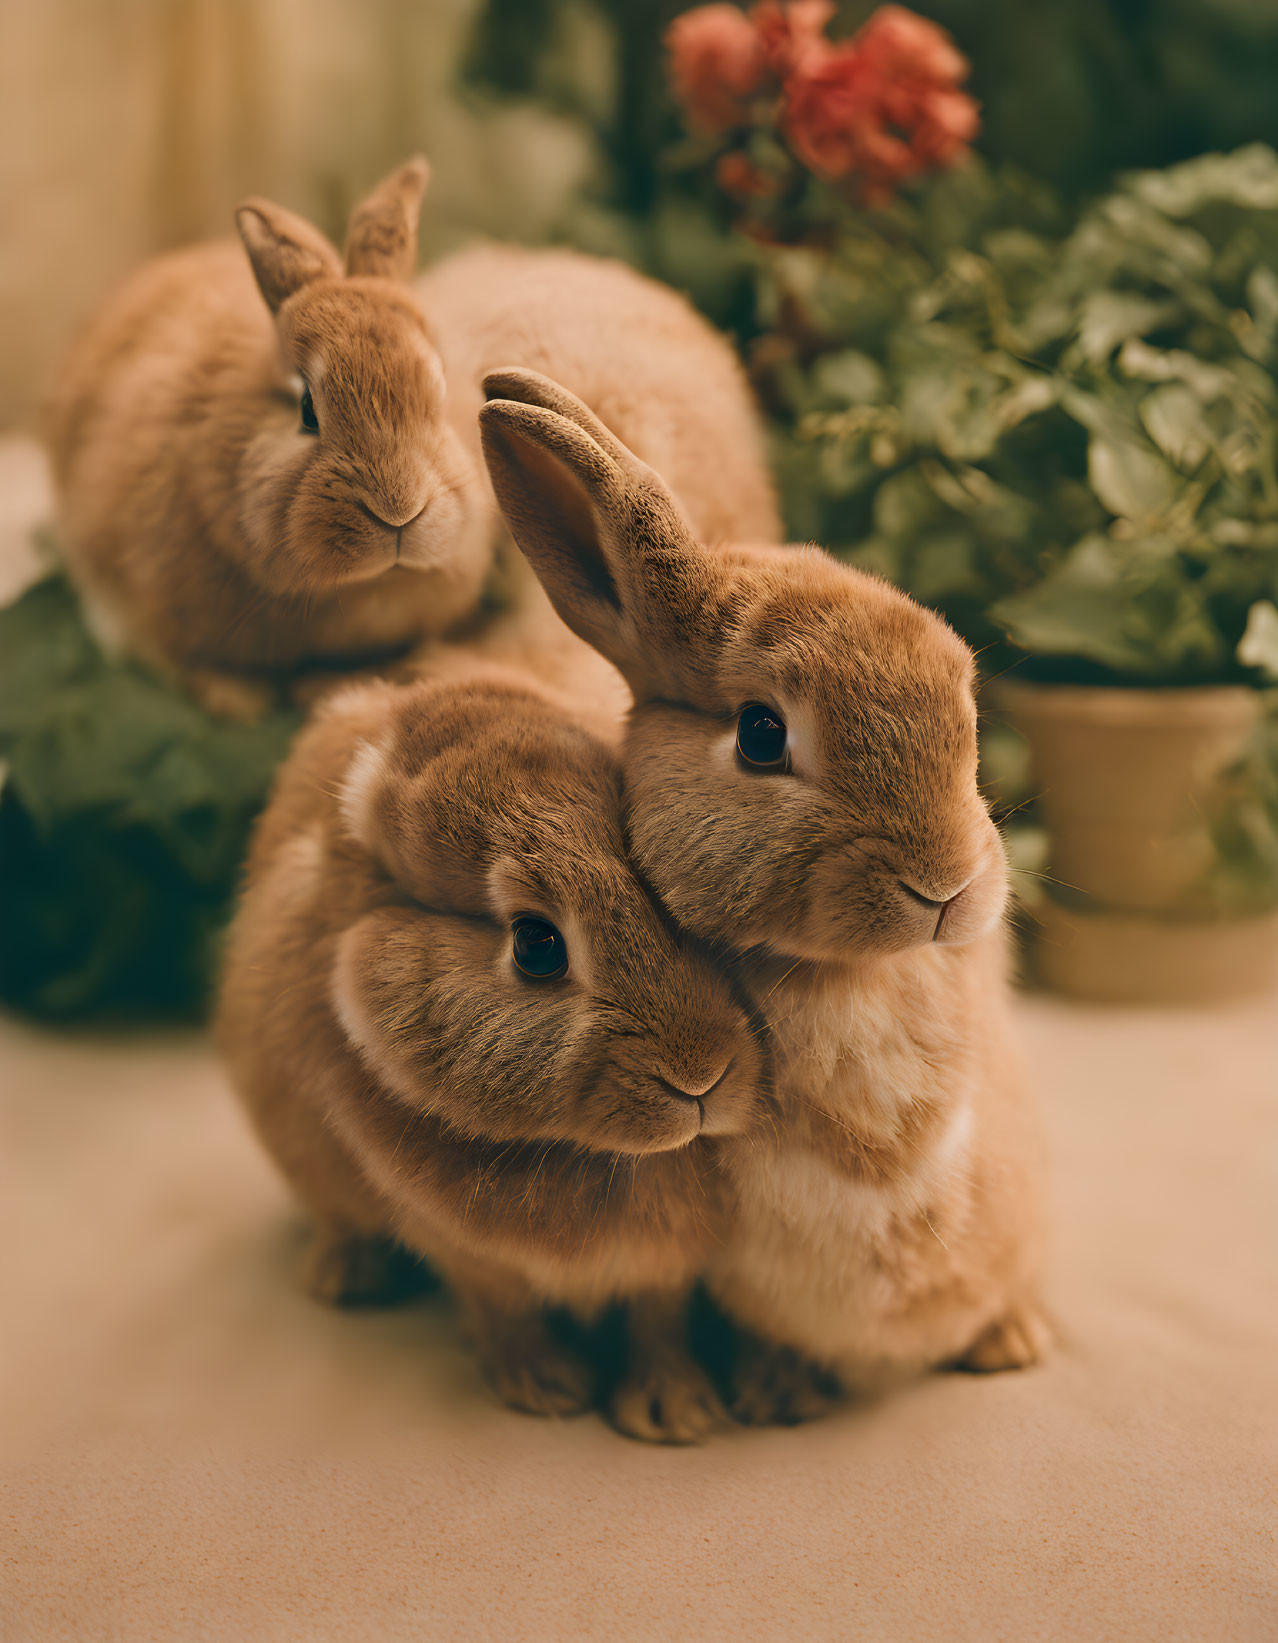 Brown rabbits cuddling with plants in background.